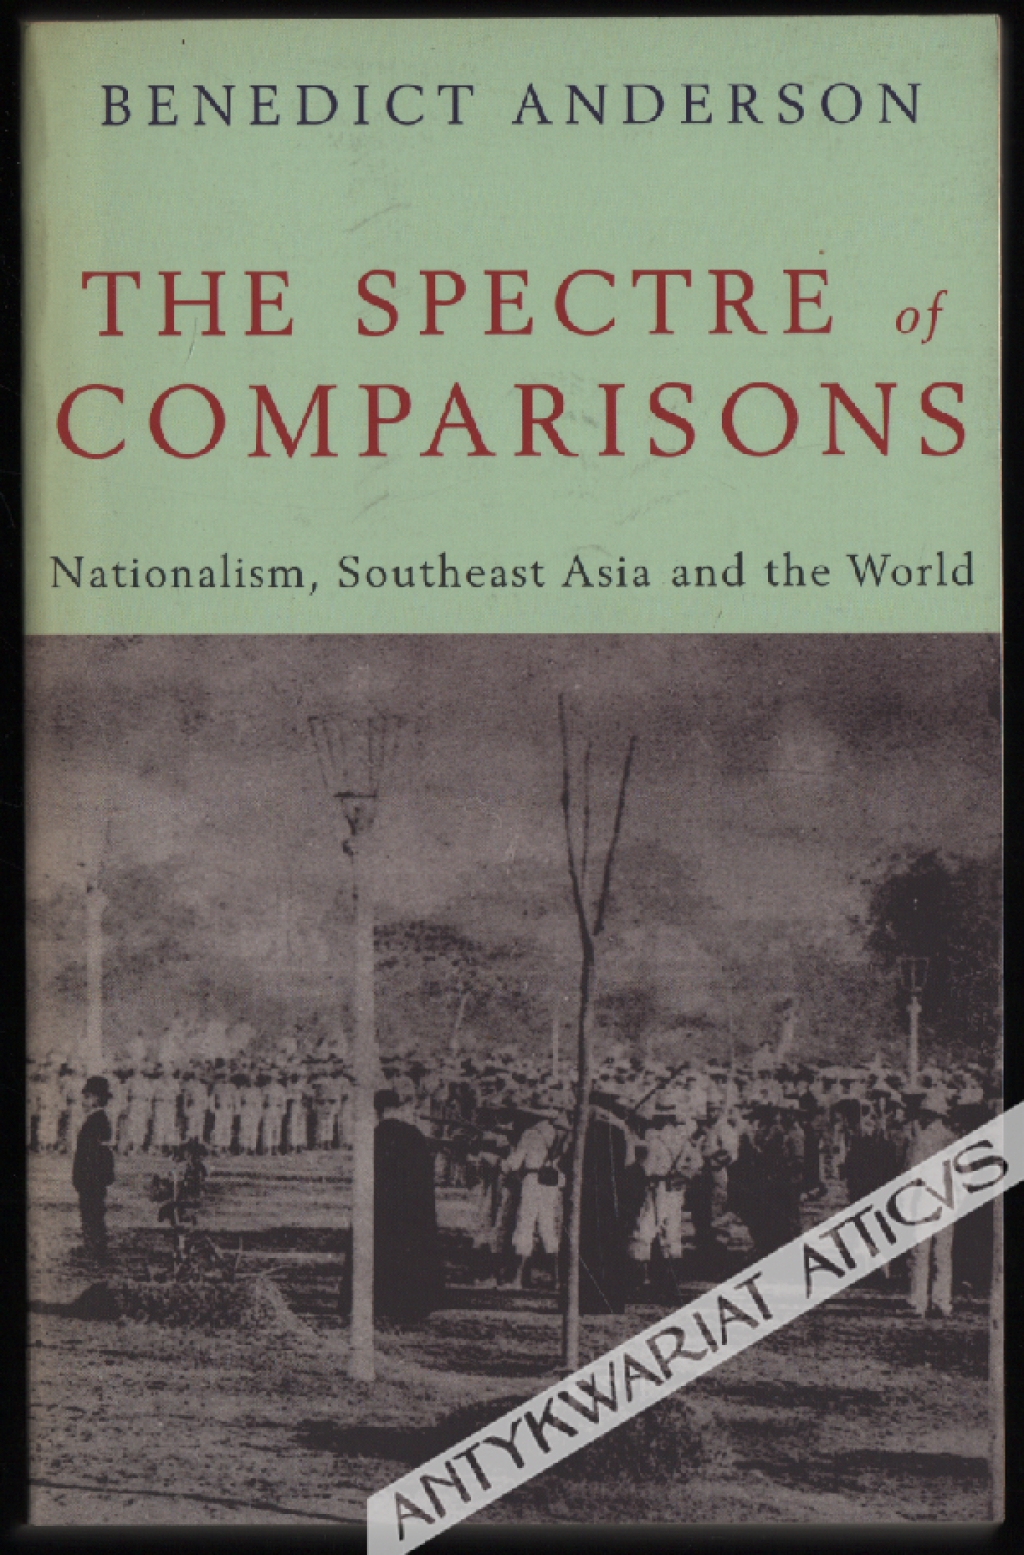 The Spectre of Comparison: Nationalism, Southeast Asia, and the World